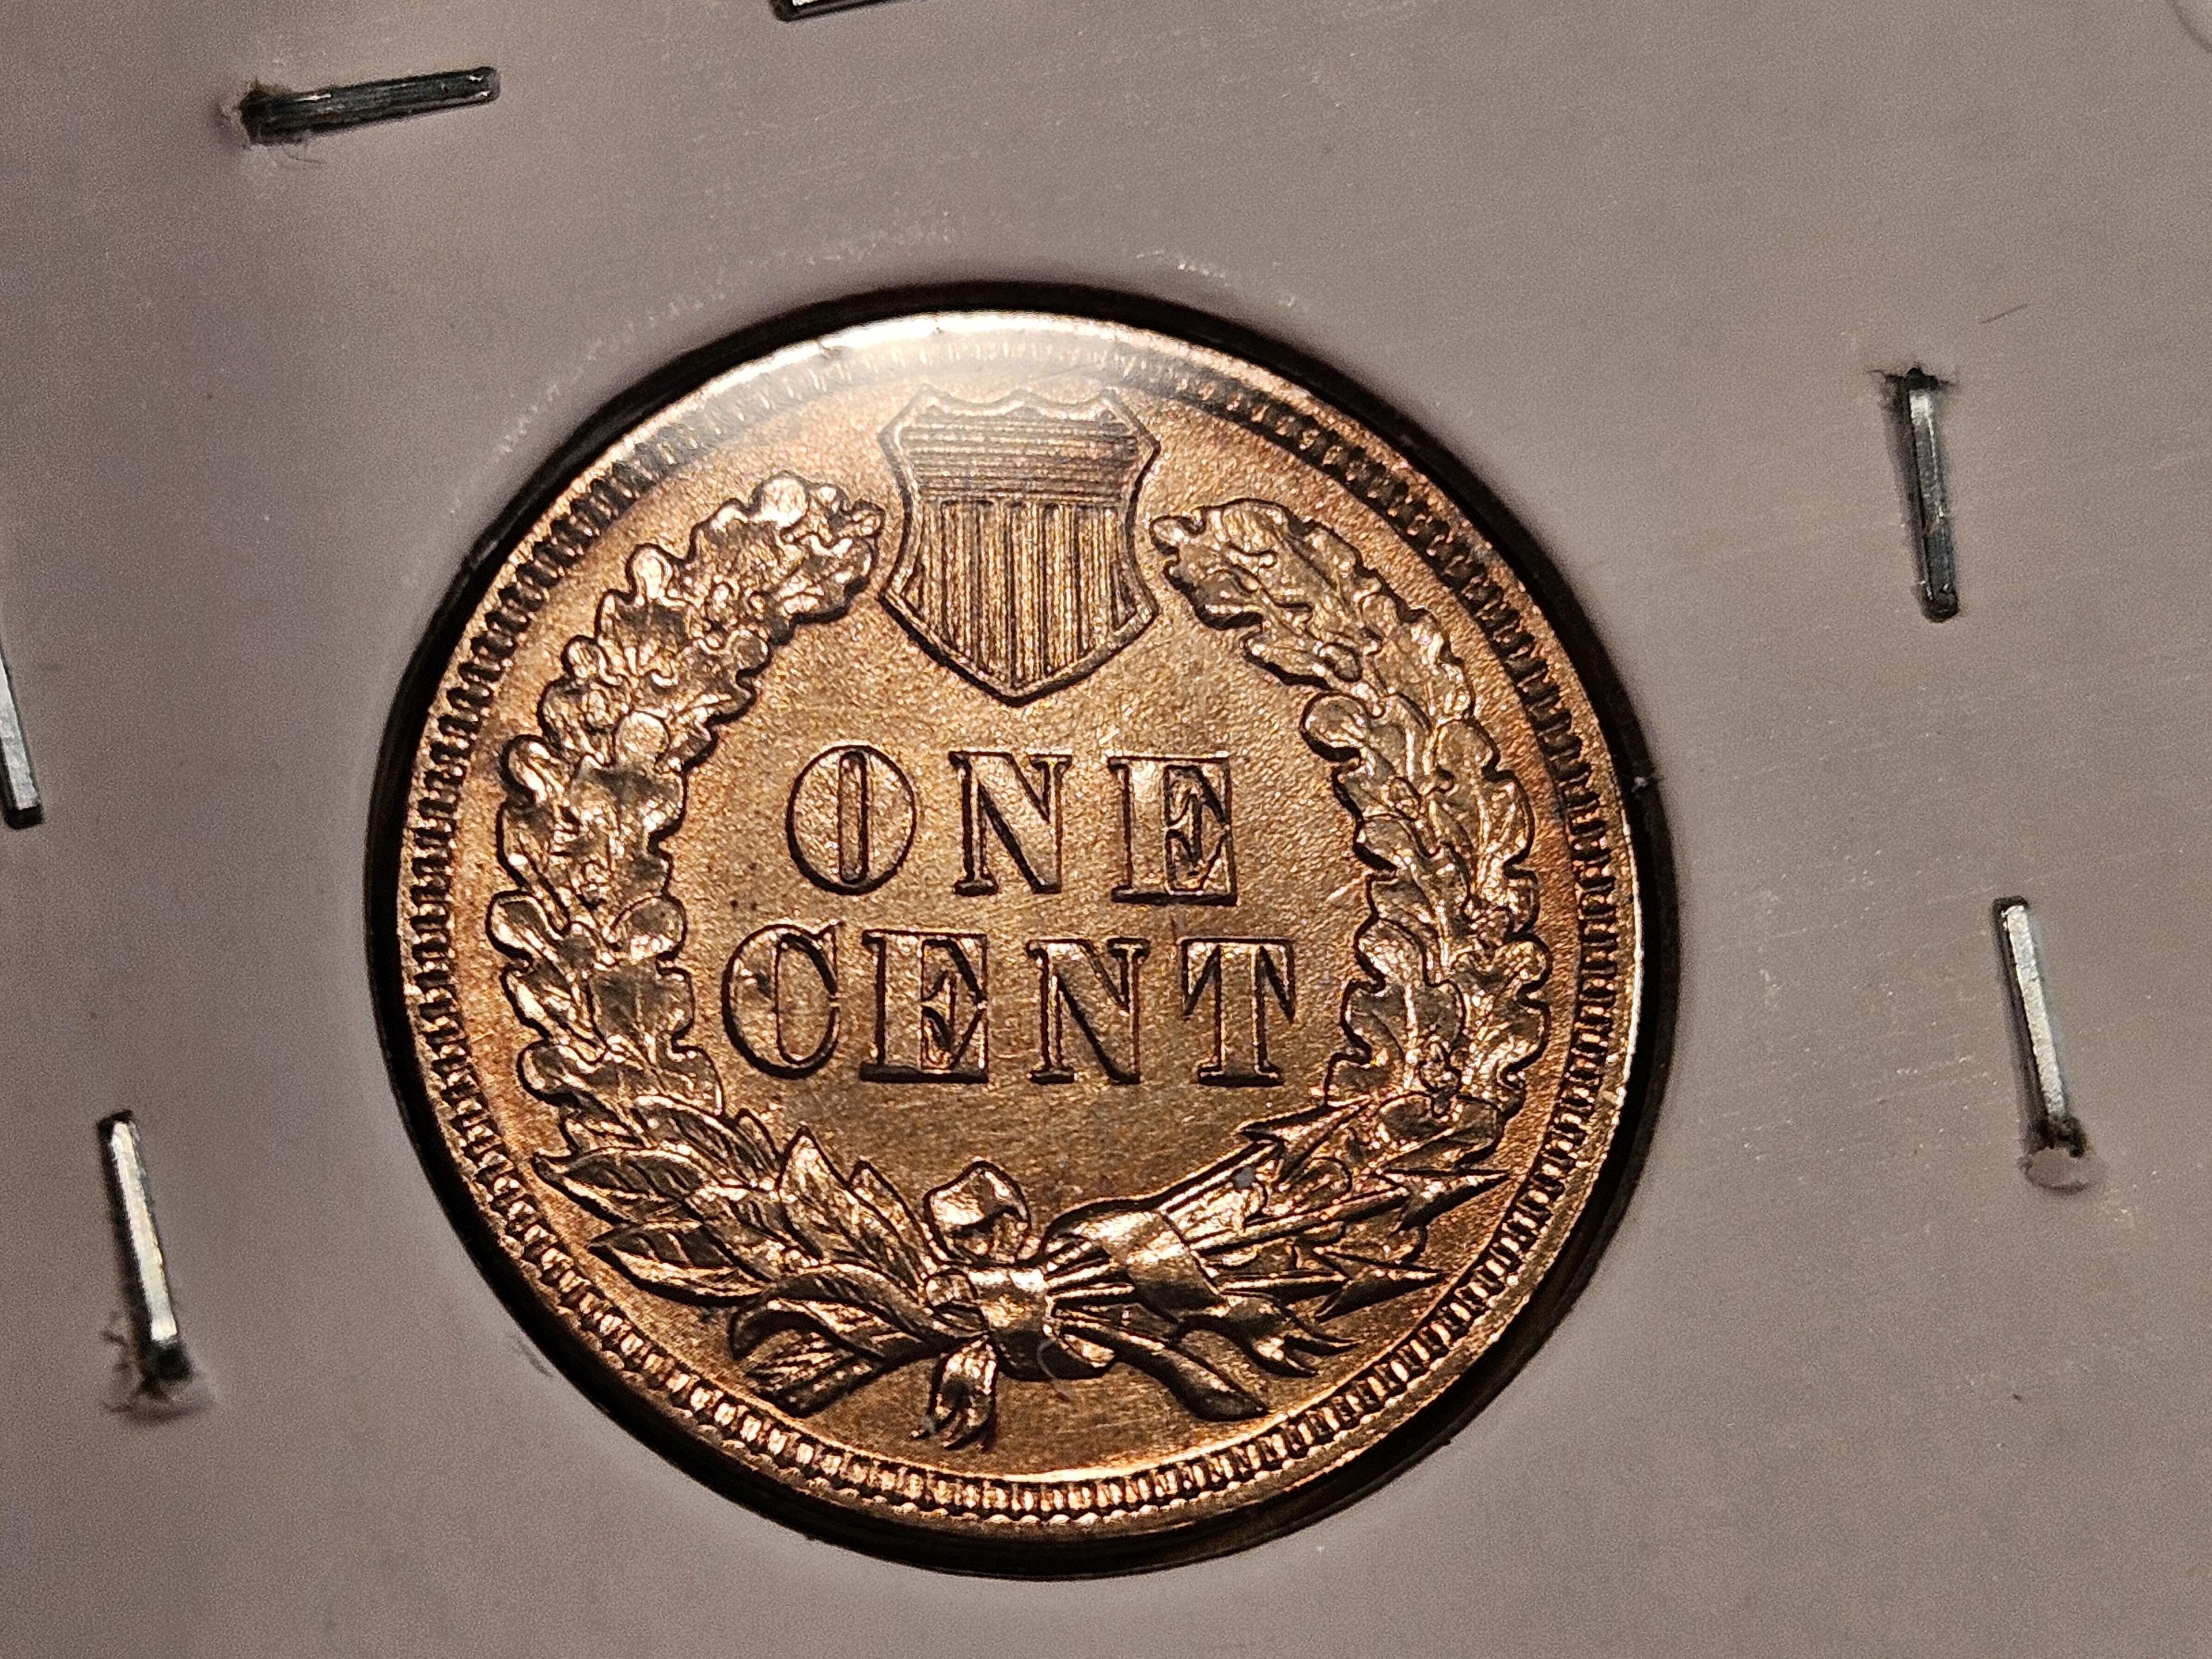 Very Choice Brilliant Uncirculated 1905 Indian Cent